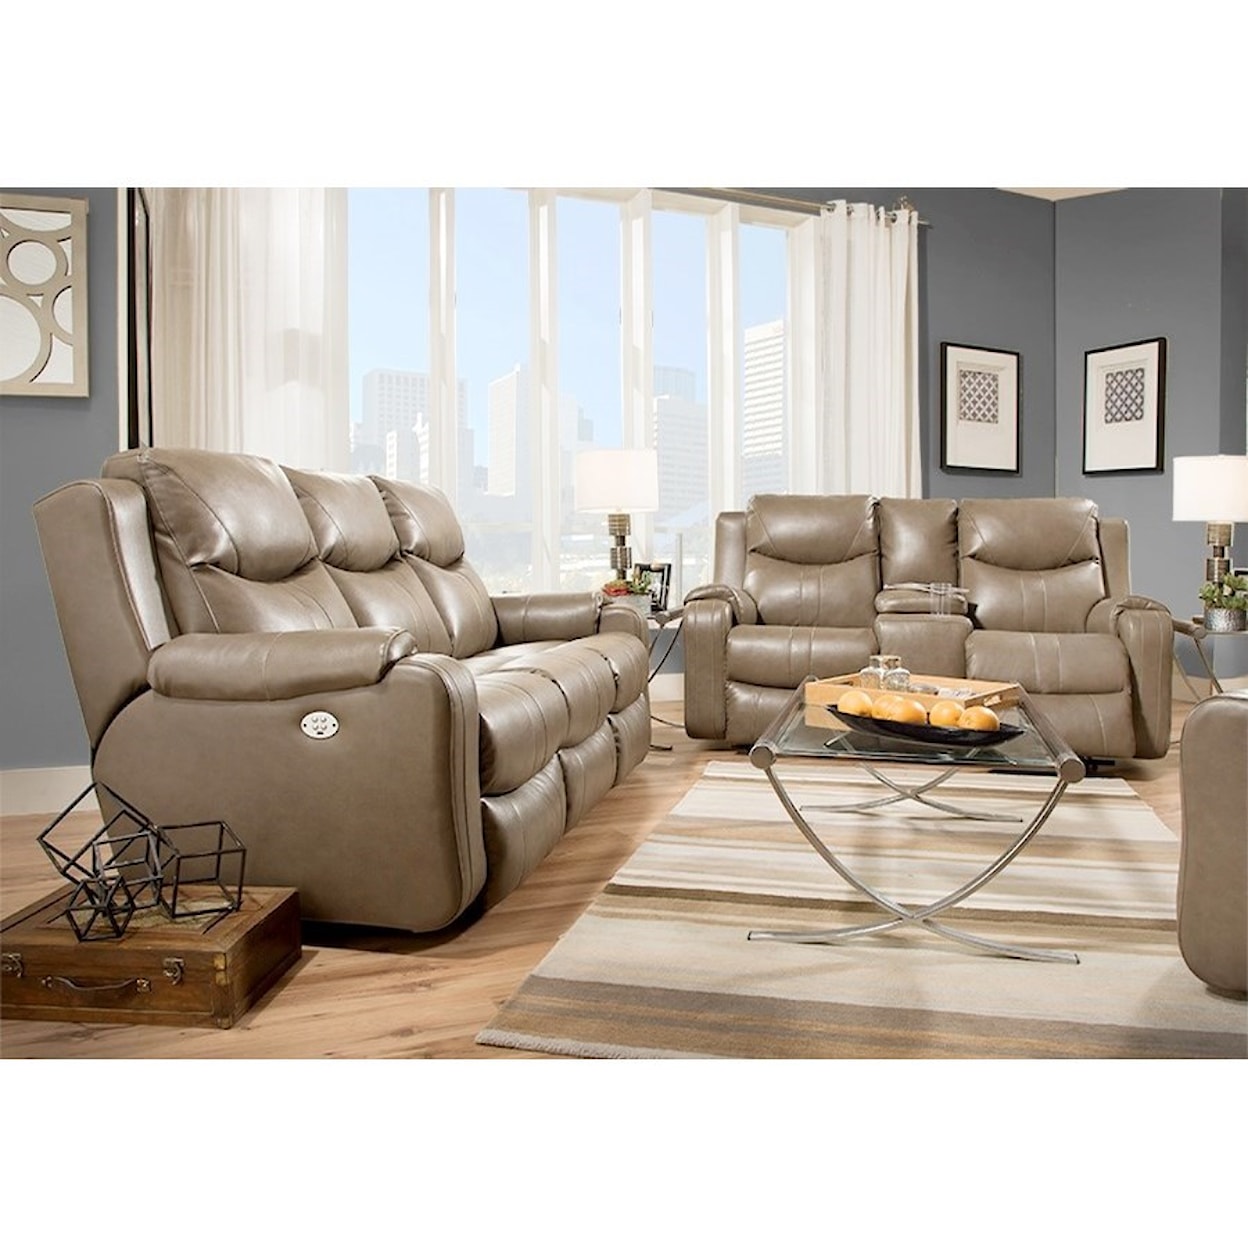 Southern Motion Marvel Double Reclining Sofa with Console